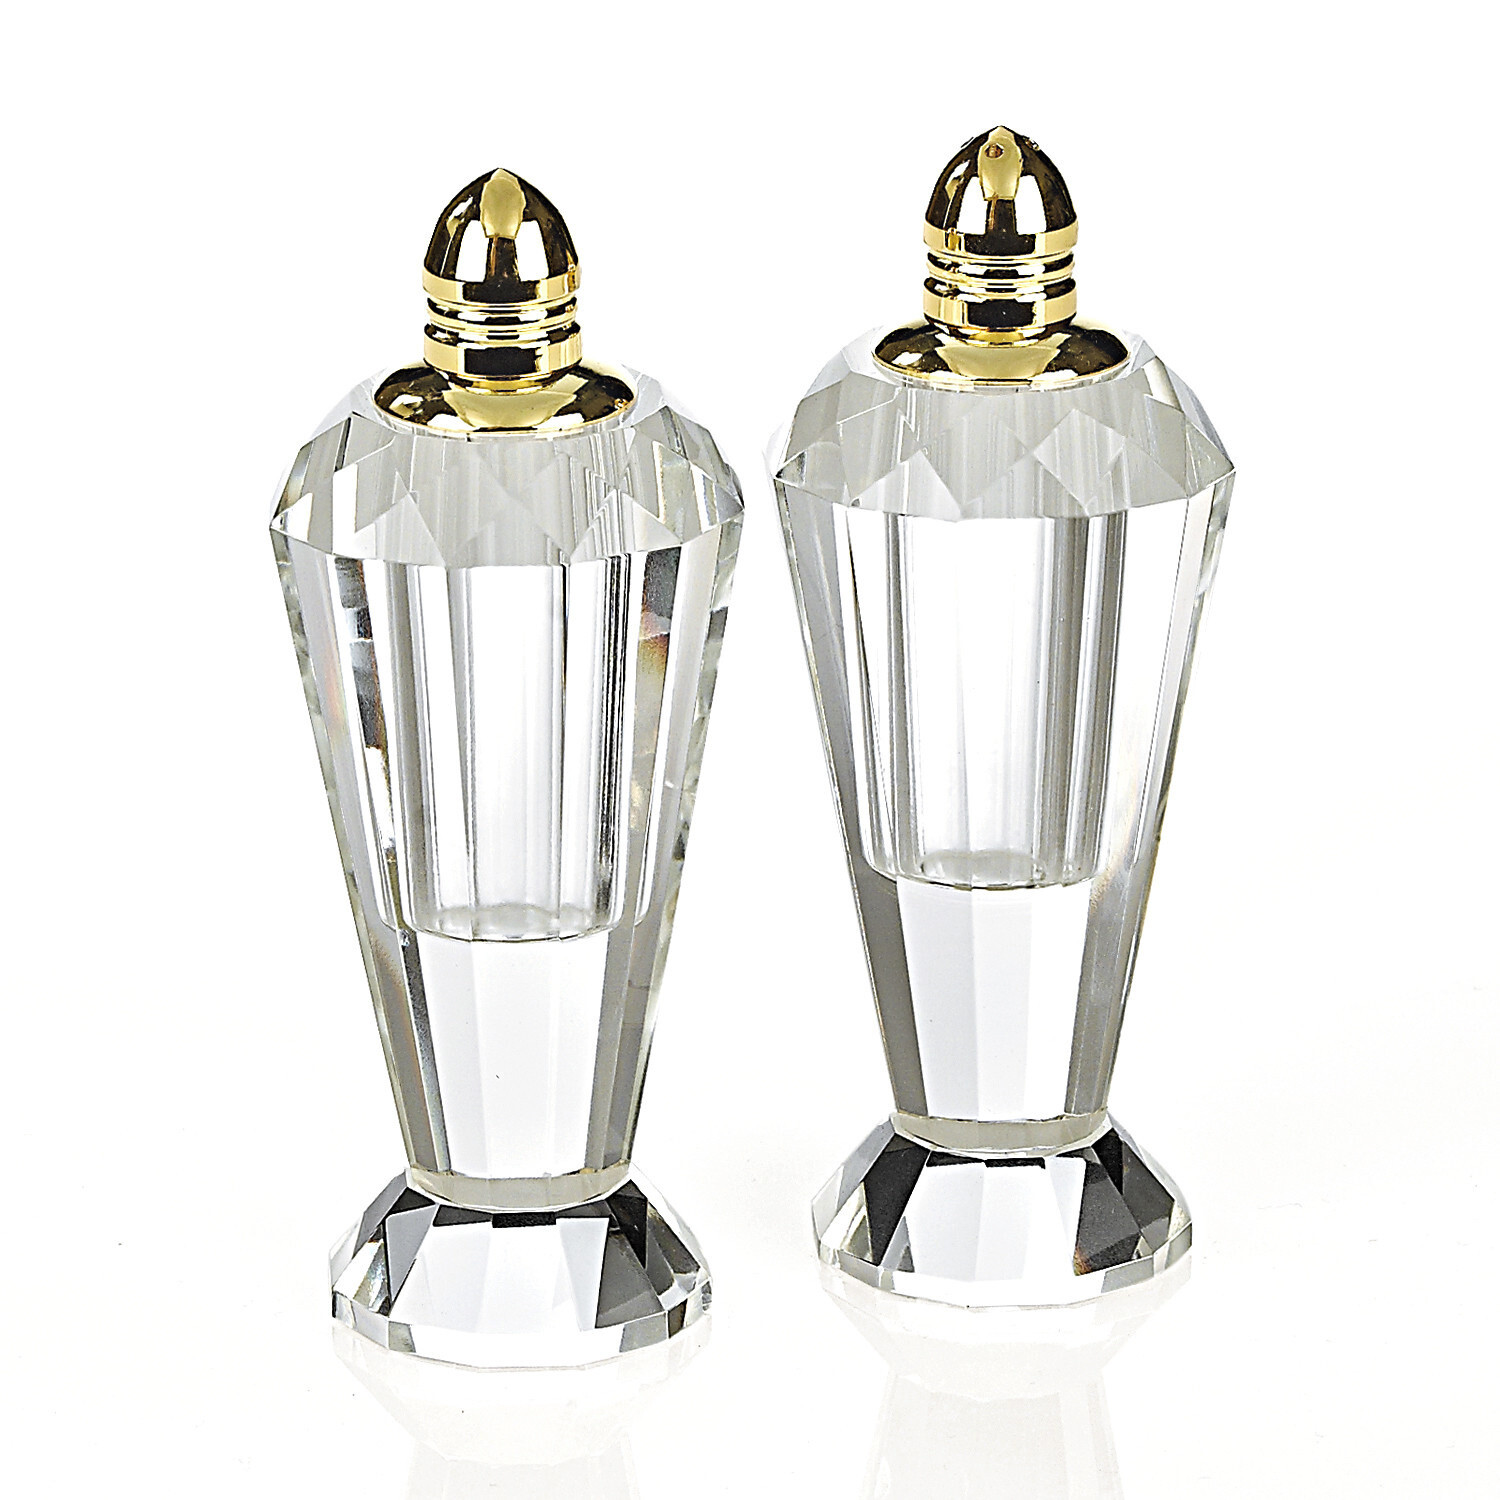 4" Gold Salt and Pepper Shakers